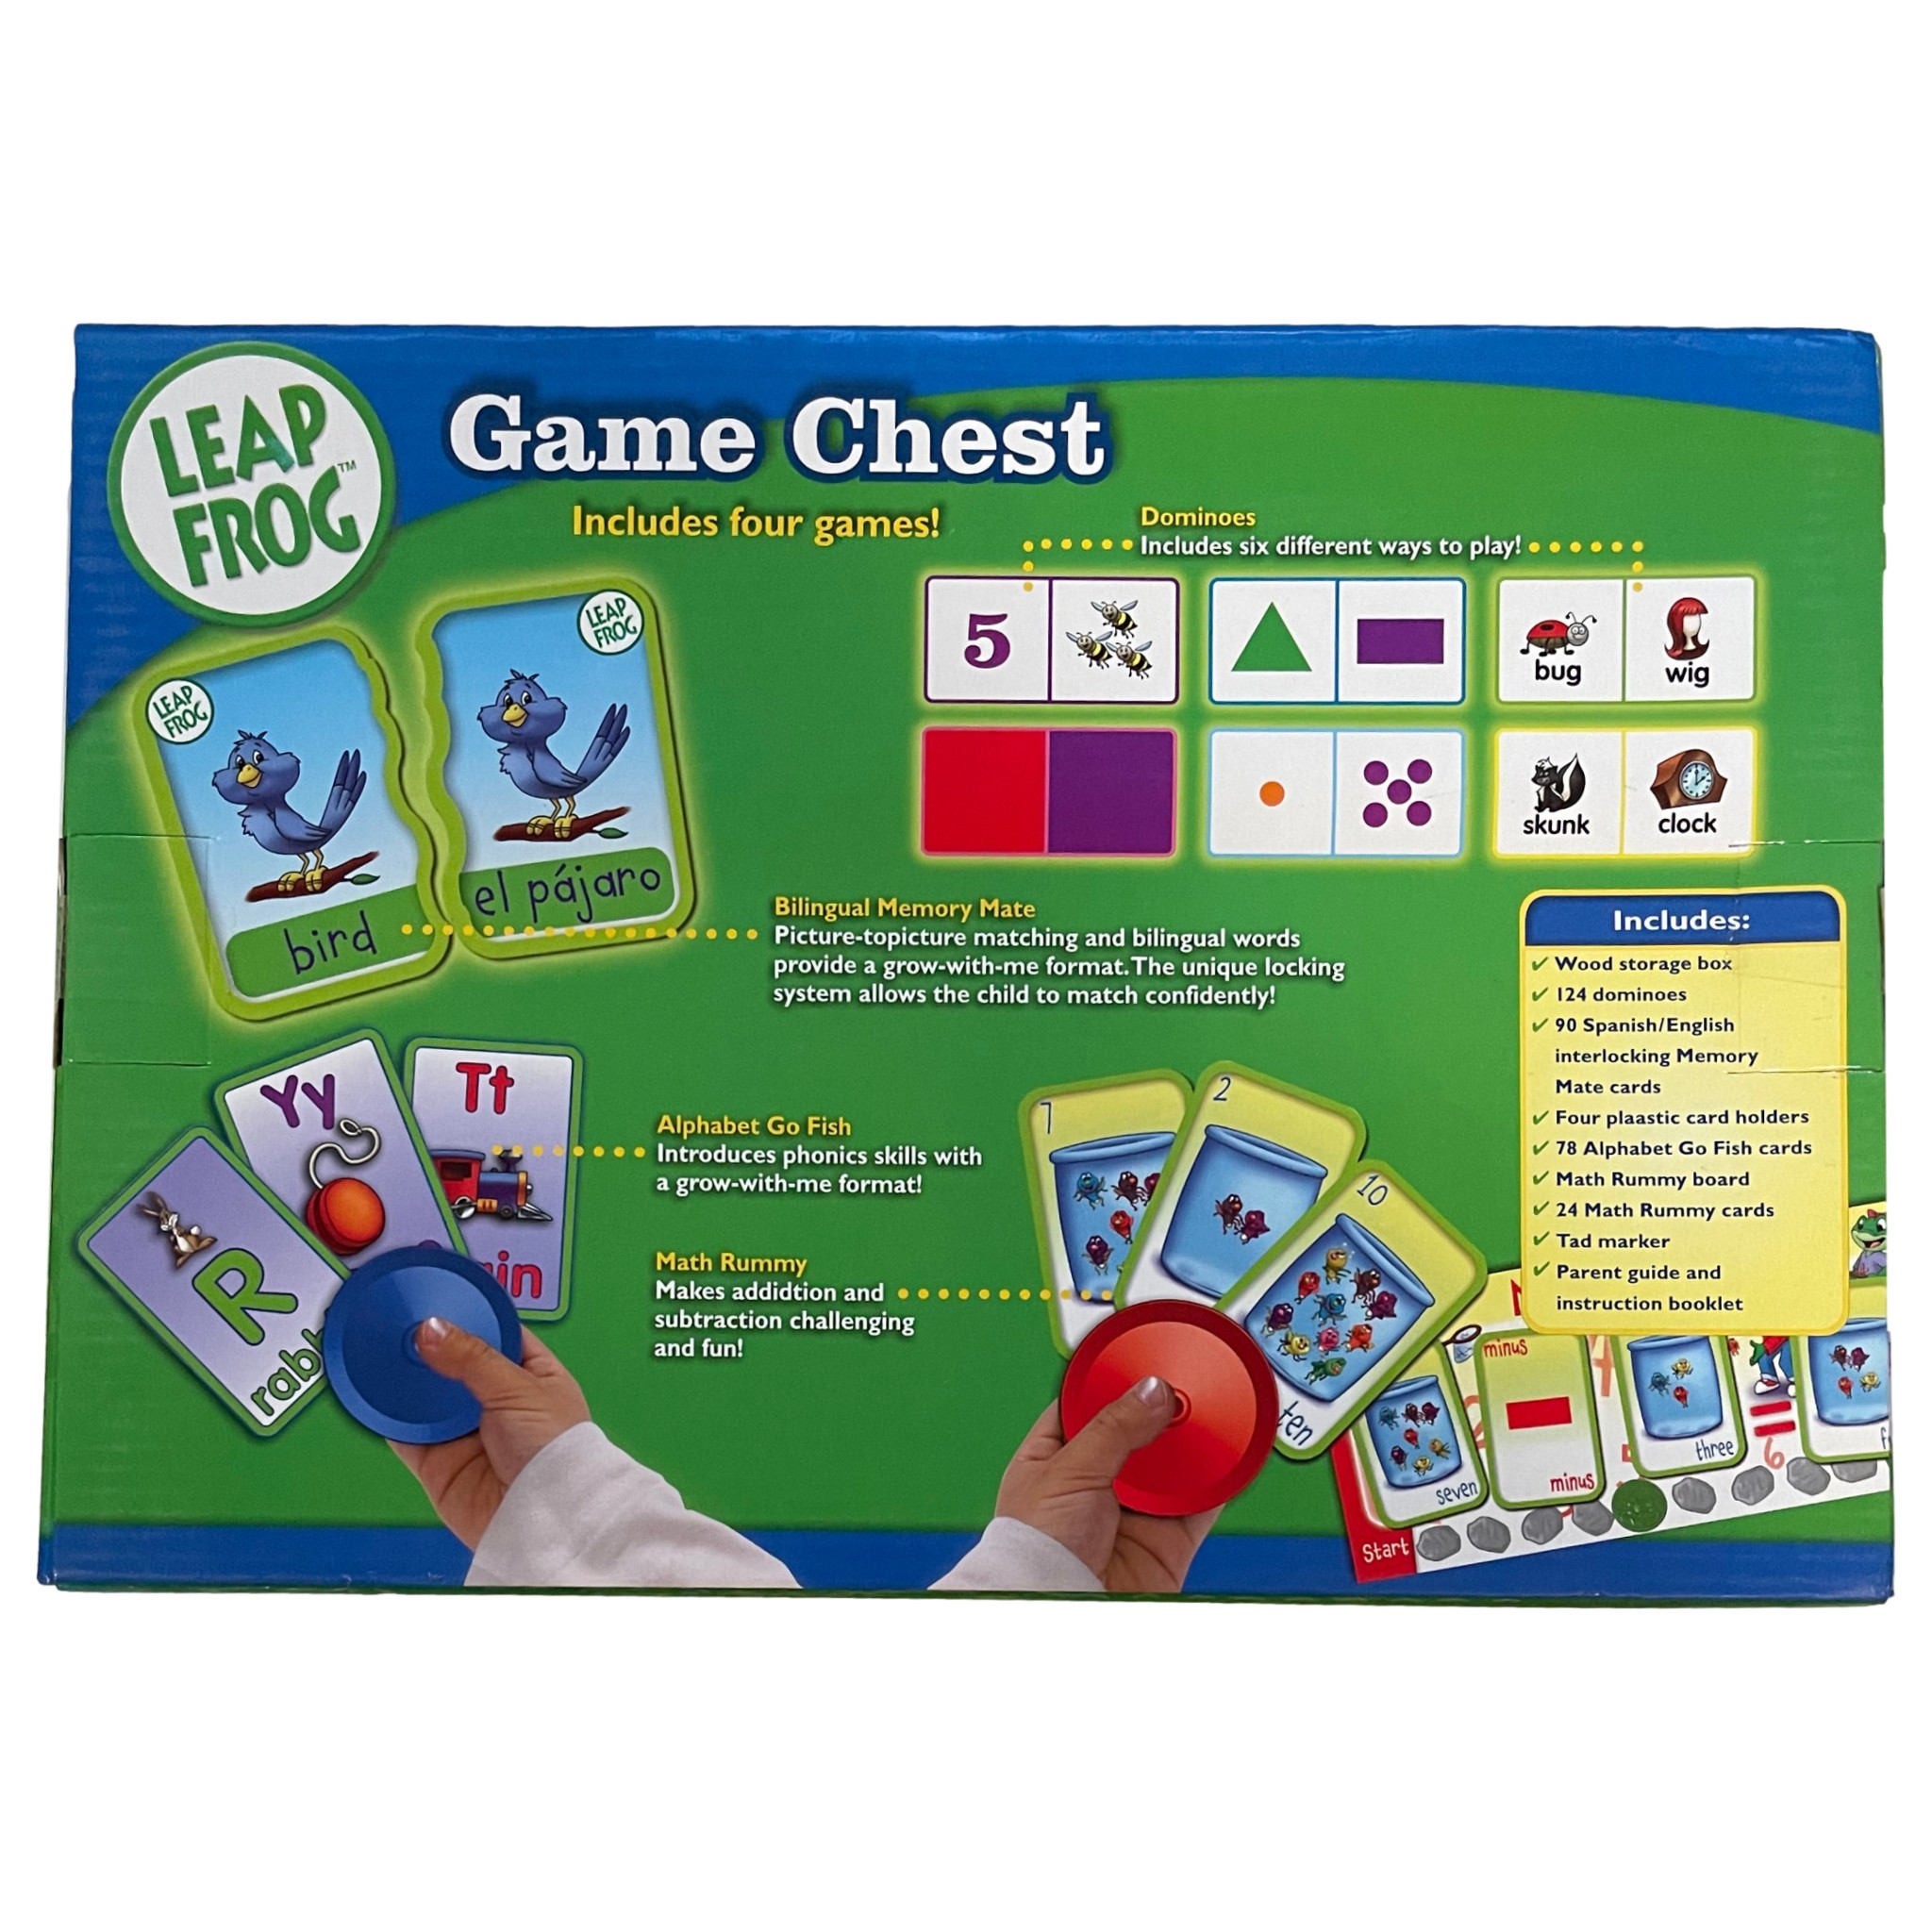 LeapFrog Leap Frog Game Chest with 4 Games Dominoes Math Rummy Alphabet Go Fish Wood Box